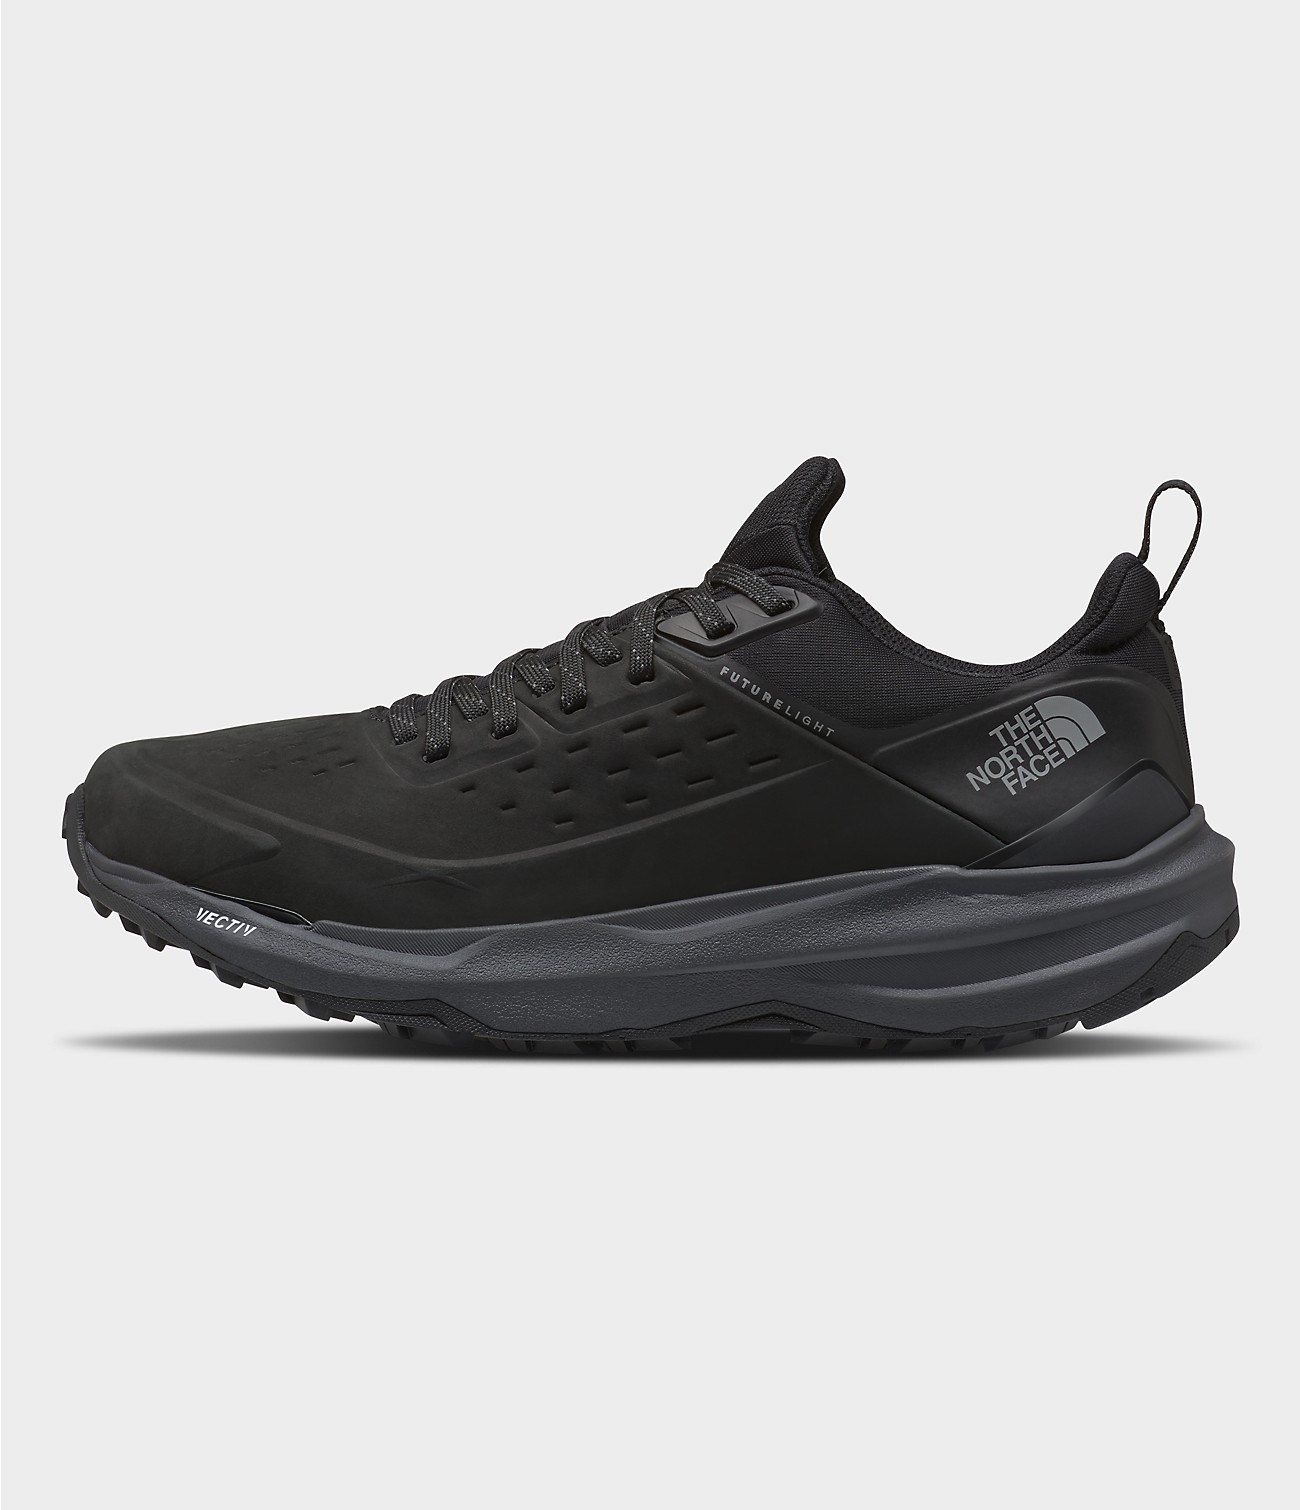 Unlock Wilderness' choice in the Keen Vs North Face comparison, the VECTIV Exploris 2 FUTURELIGHT™ Leather Shoes by The North Face